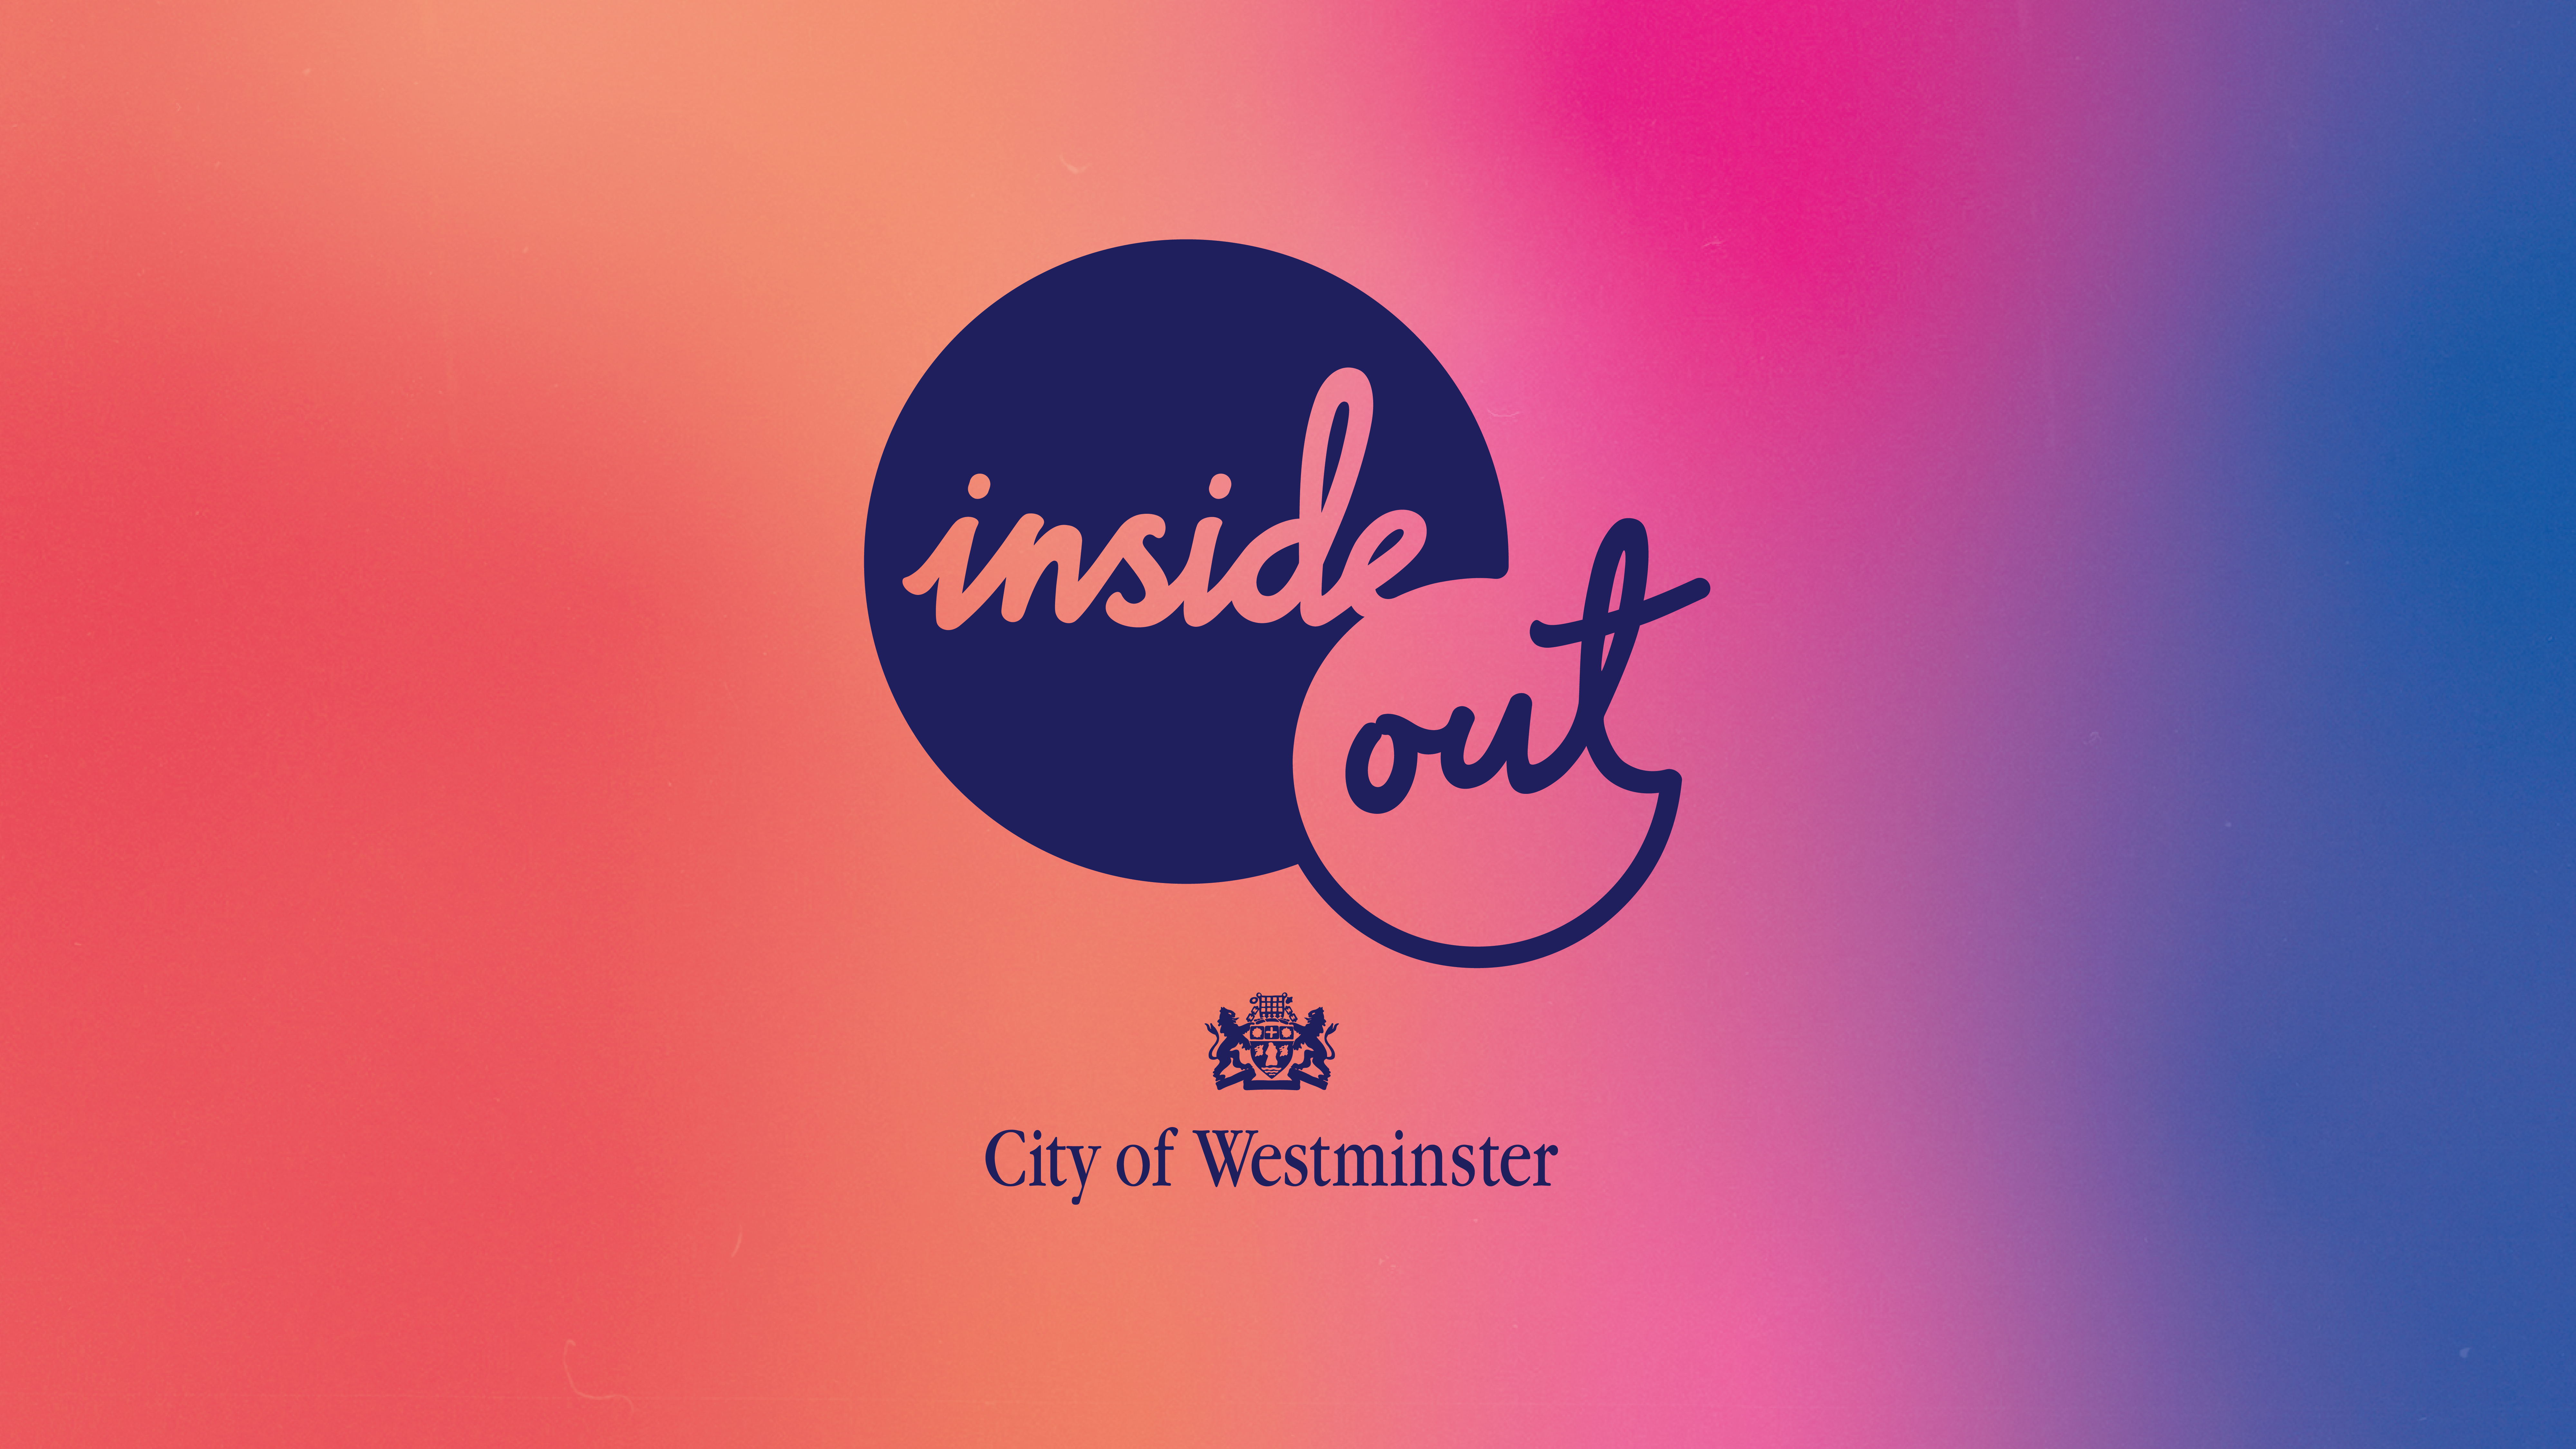 Made possible with Westminster City Council's Inside Out programme, Silent Disco Walking Tours